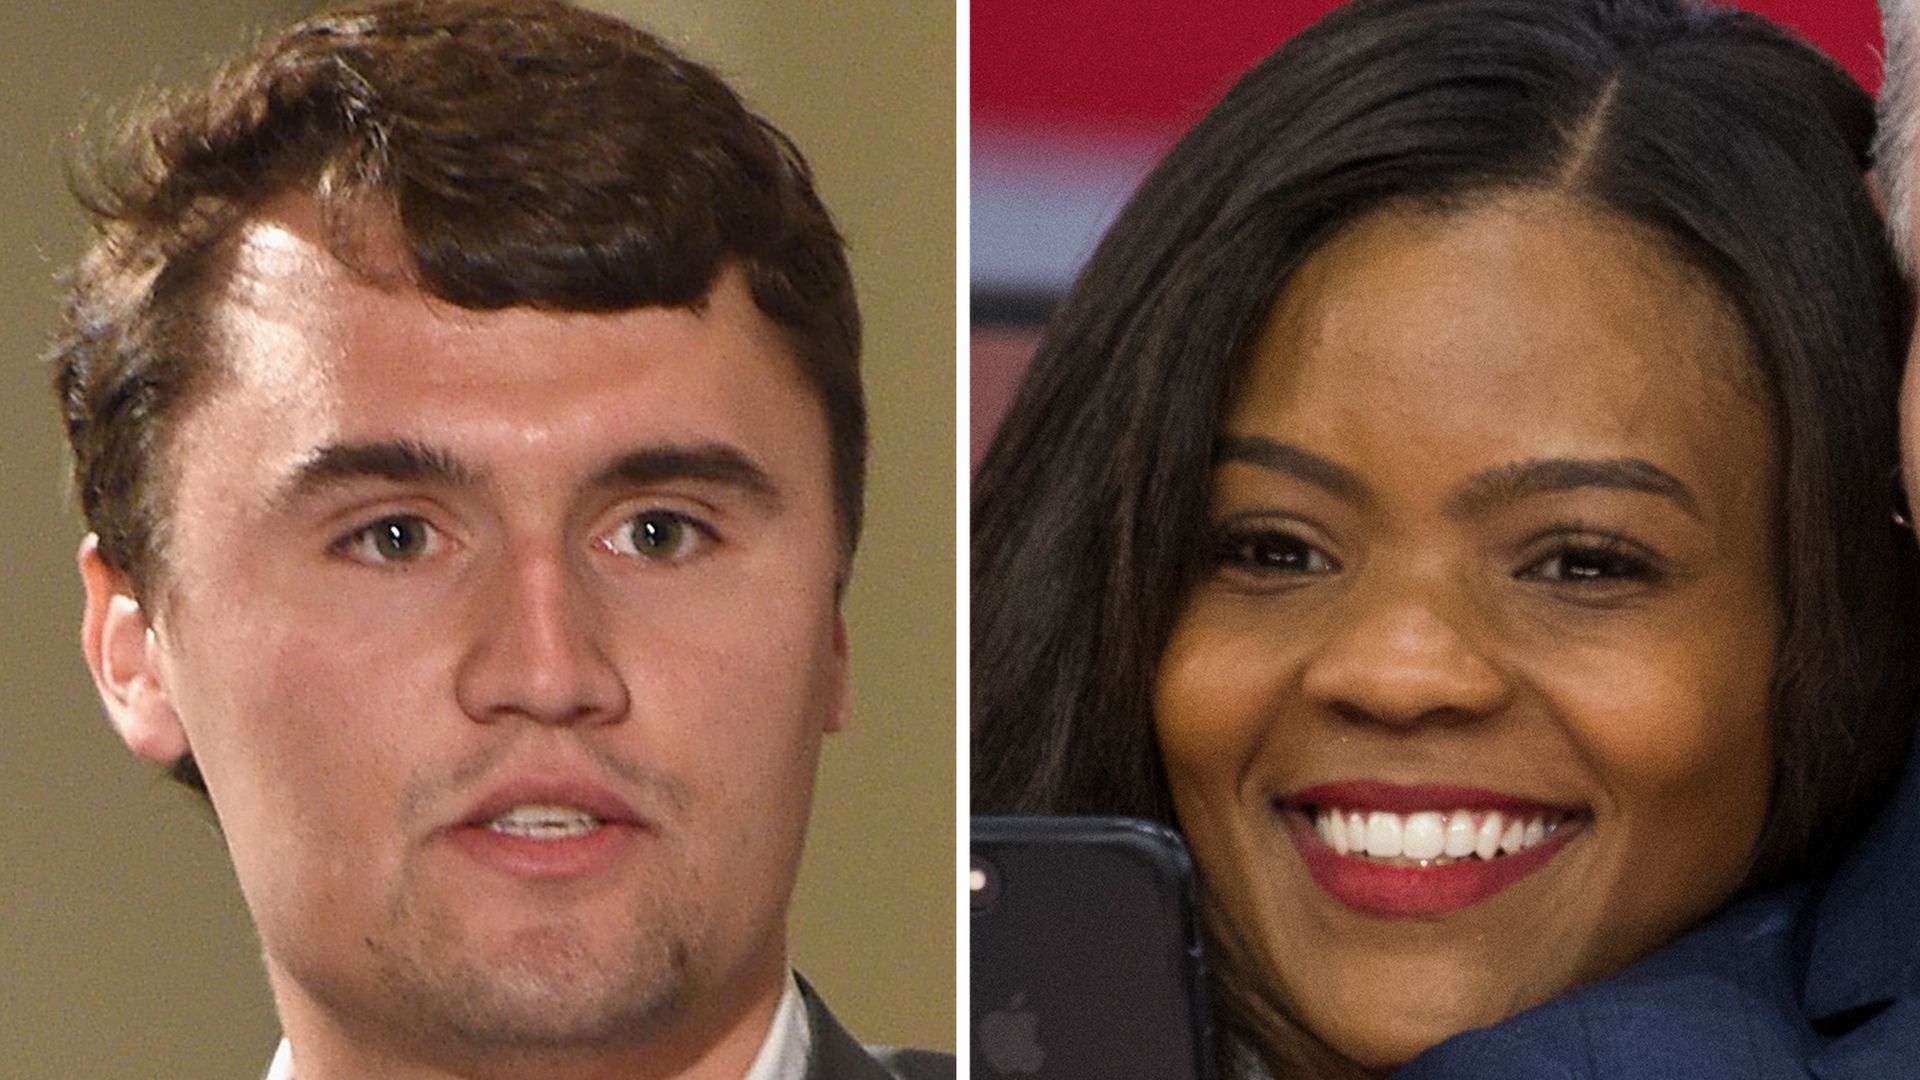 Charlie Kirk and Candace Owens